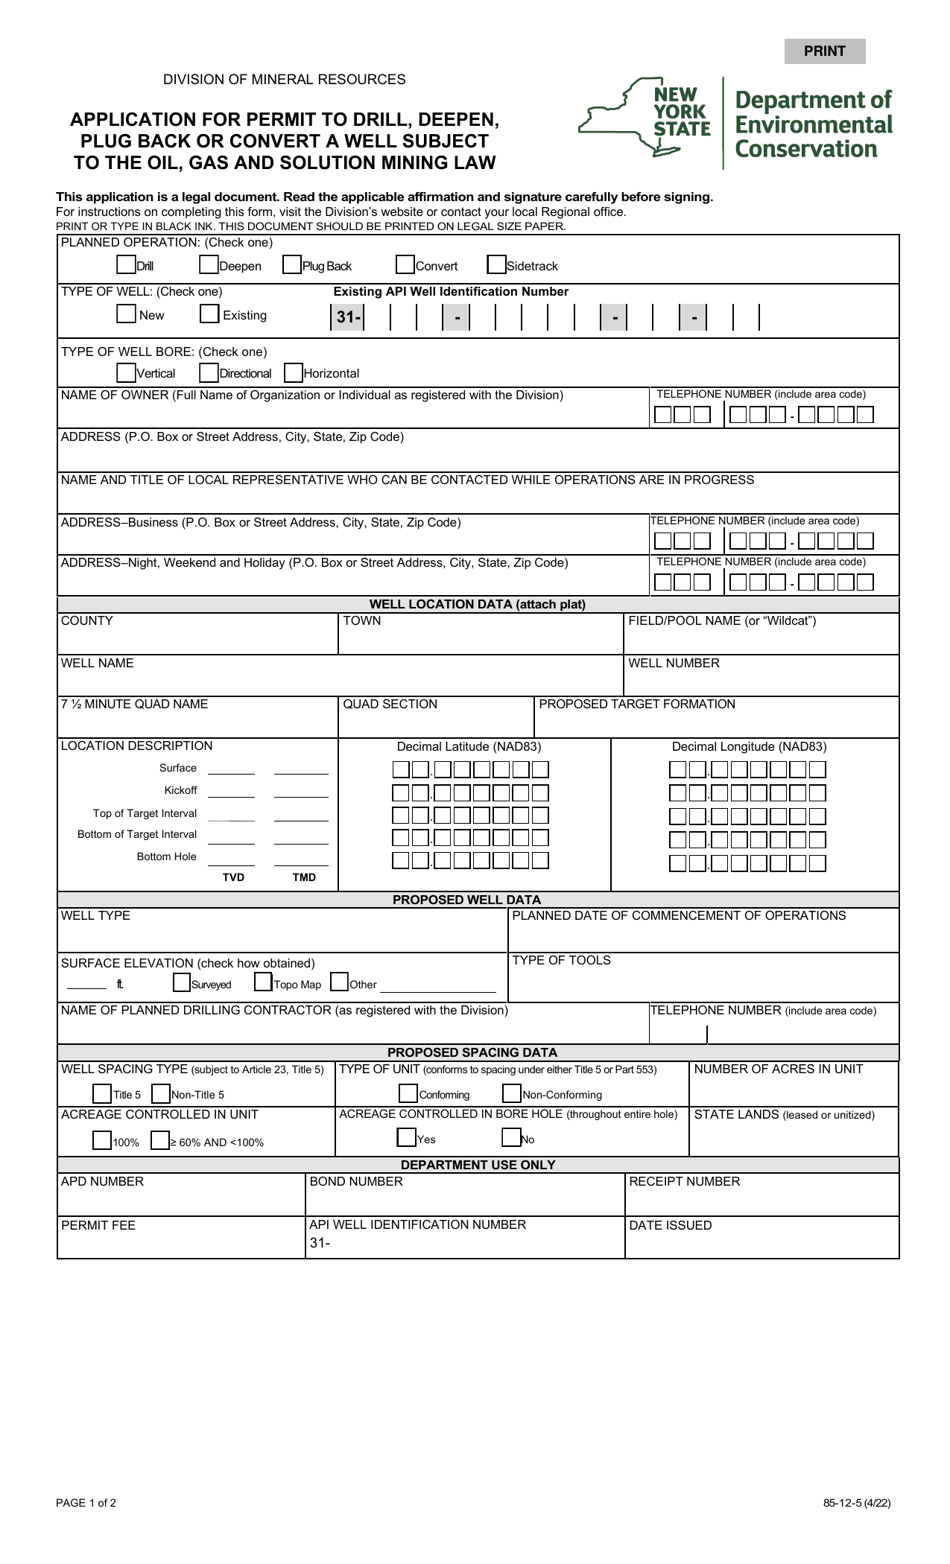 Form 85-12-5 Application for Permit to Drill, Deepen, Plug Back or Convert a Well Subject to the Oil, Gas and Solution Mining Law - New York, Page 1